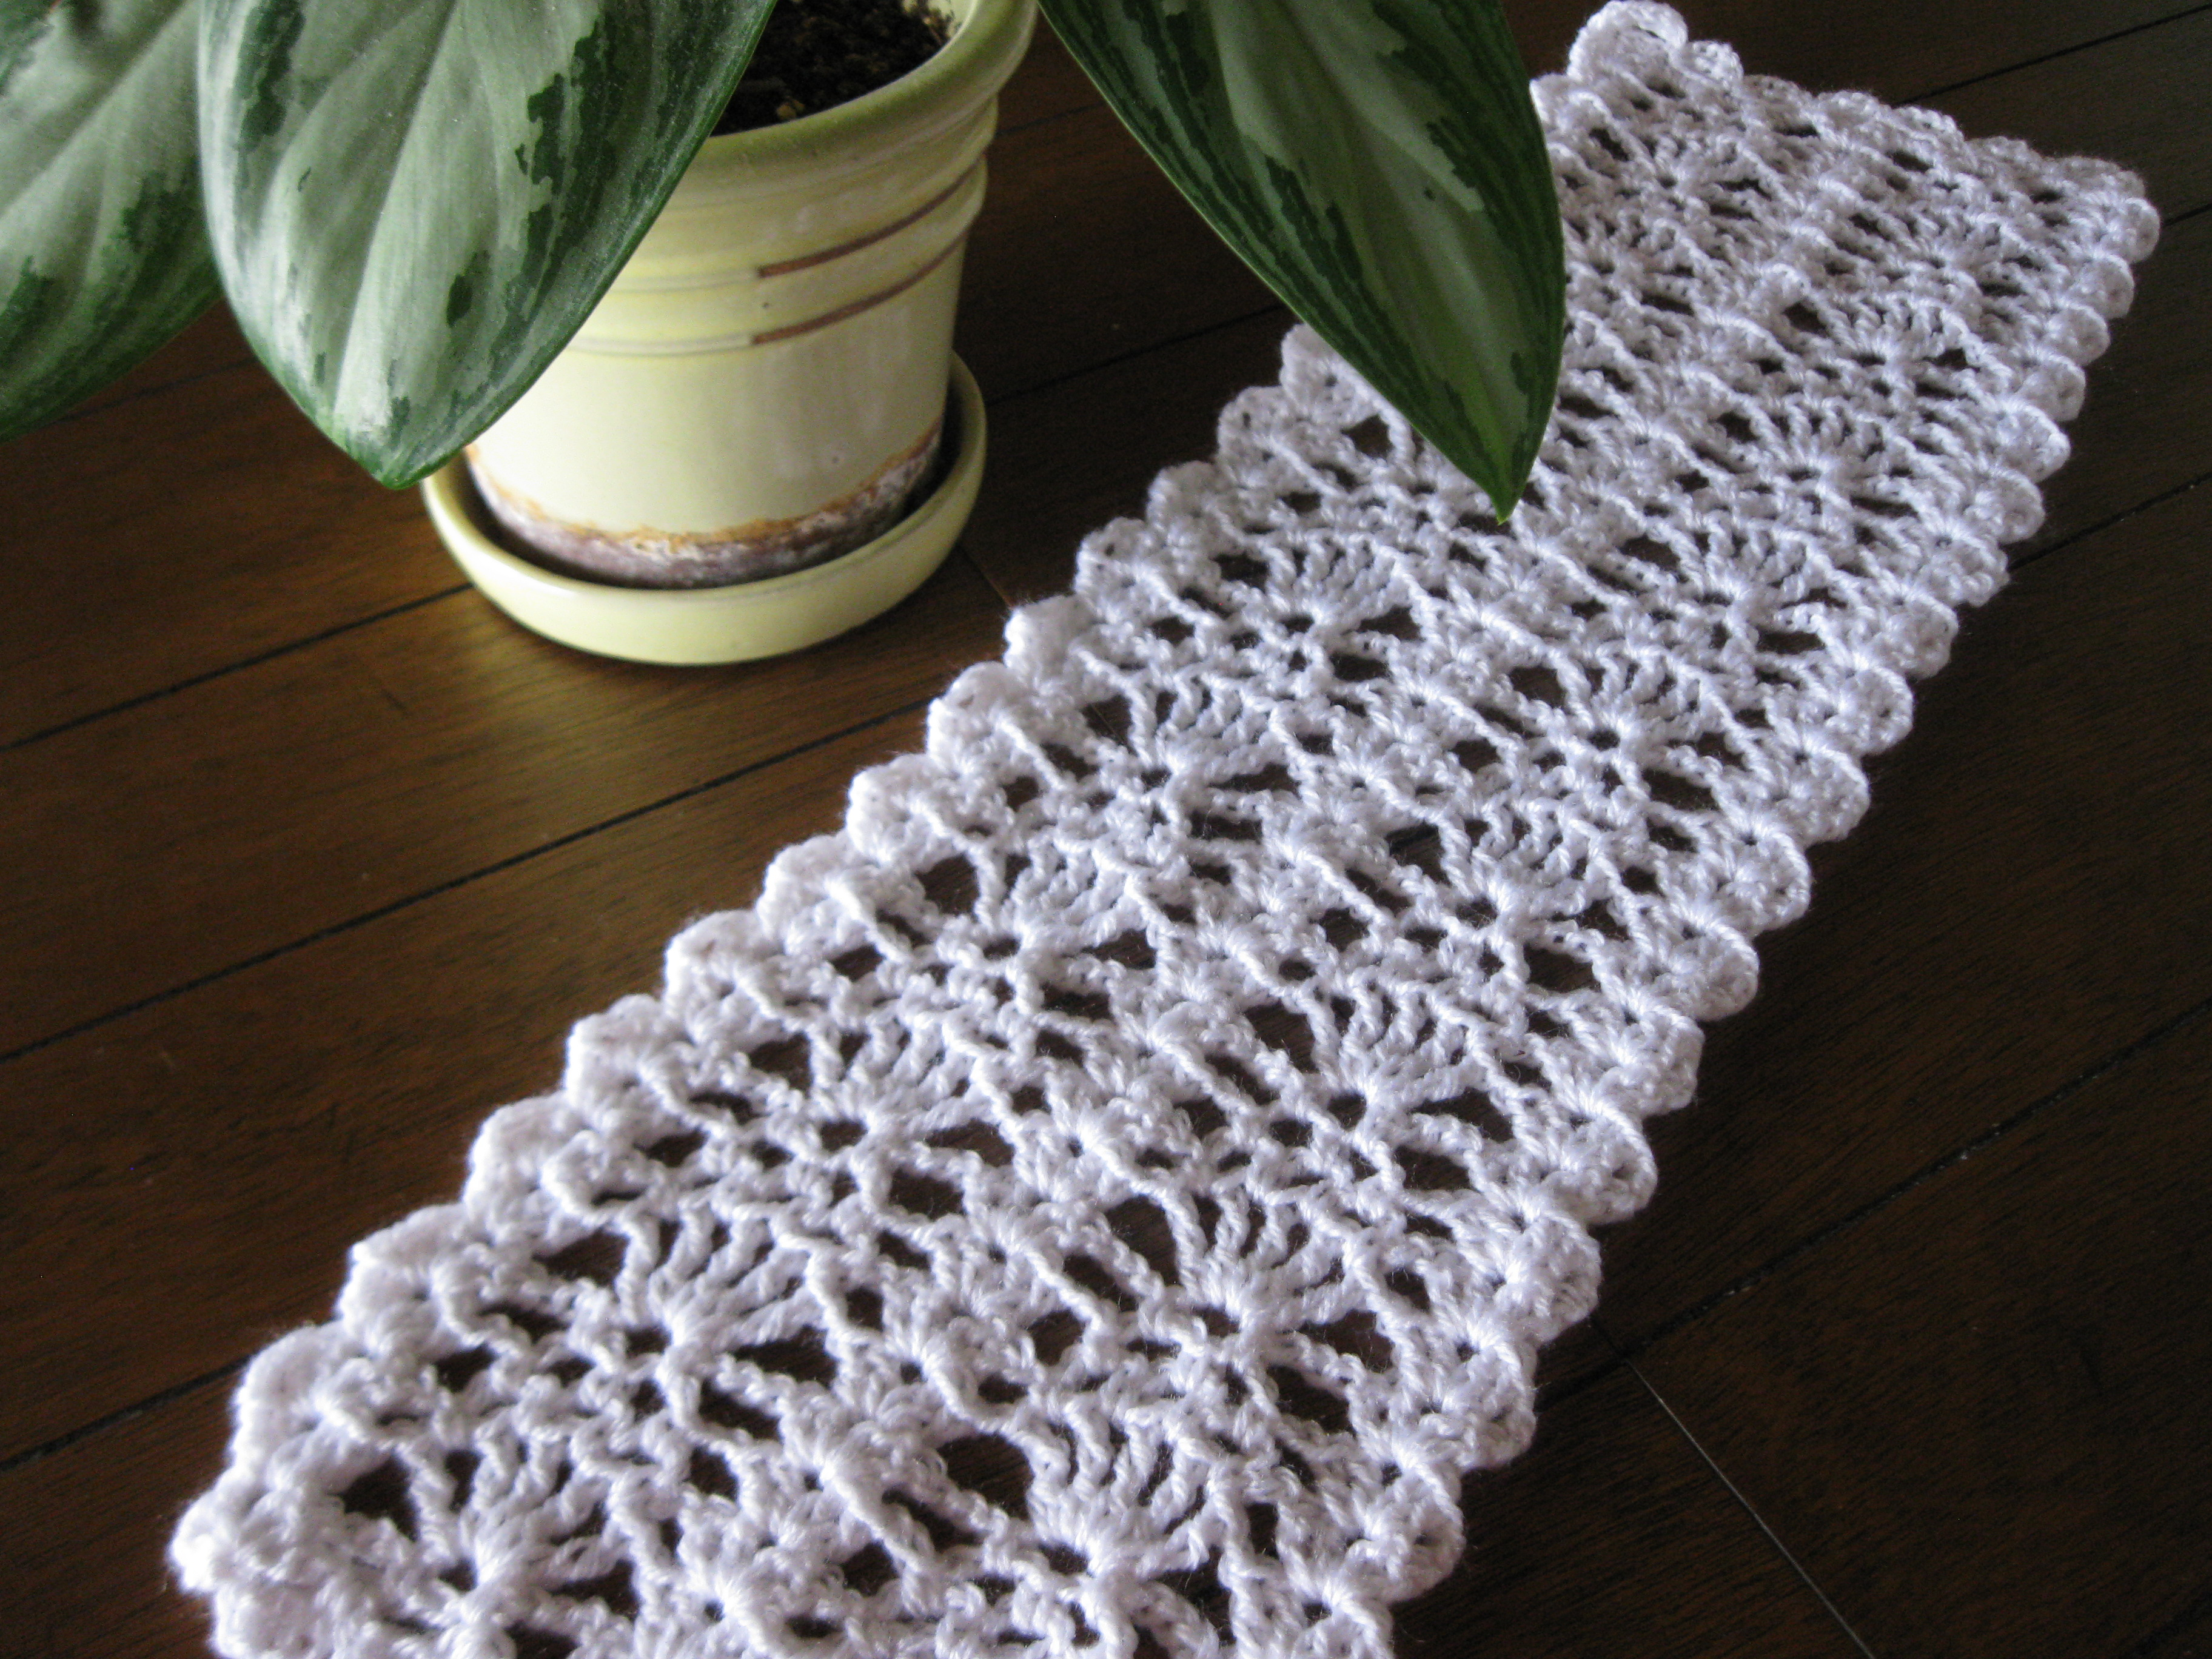 Crochet Table Runner Patterns Day 81365 The Day I Finished My Short Crocheted Table Runner 365